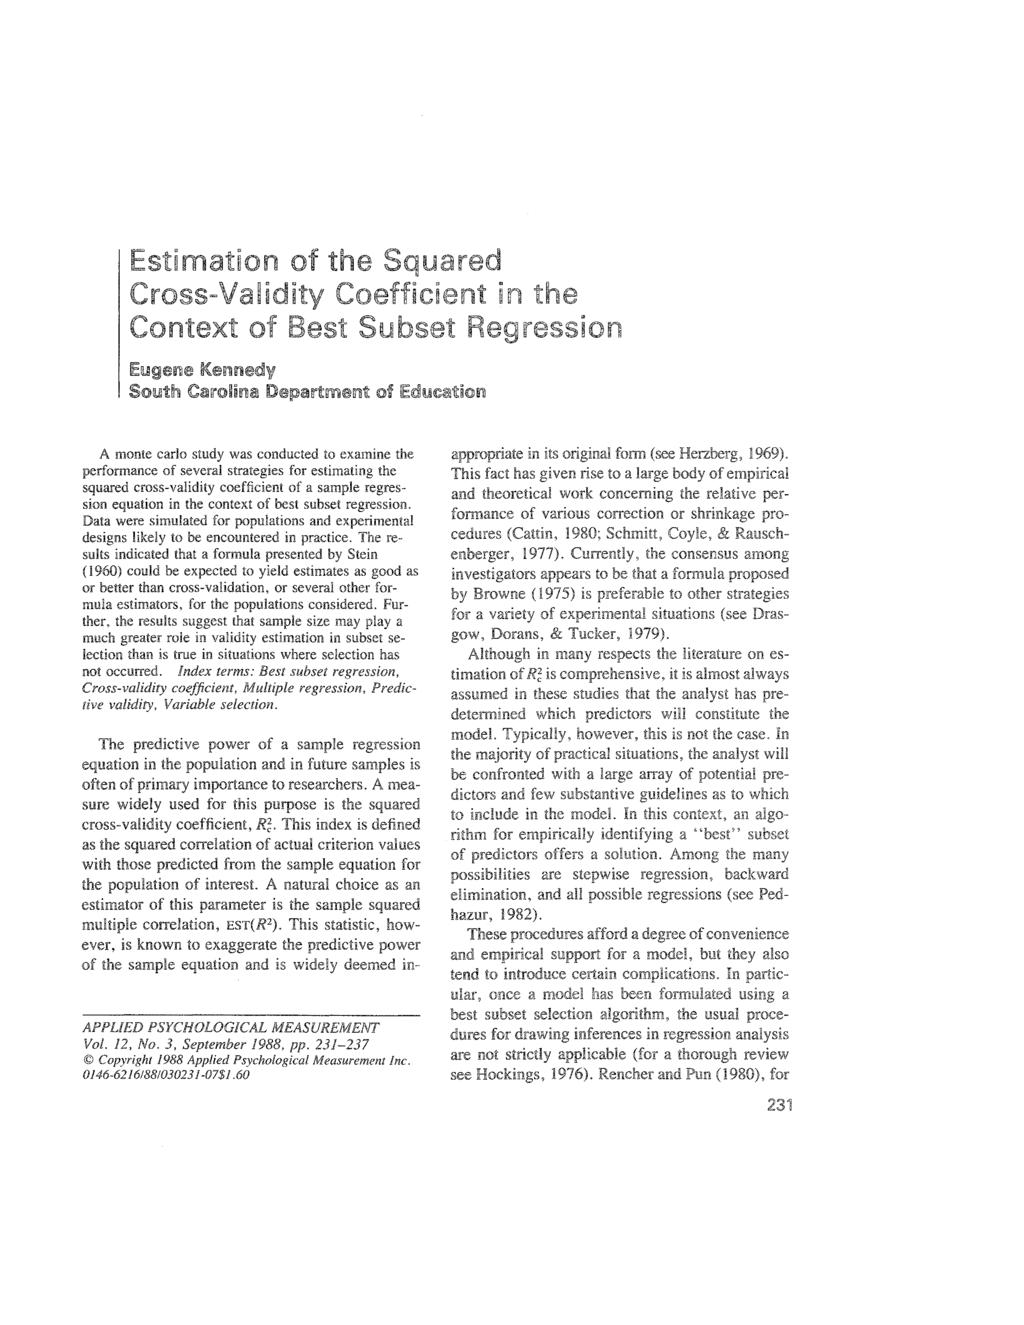 Estimation of the Squared Cross-Validity Coefficient in the Context of Best Subset Regression Eugene Kennedy South Carolina Department of Education A monte carlo study was conducted to examine the